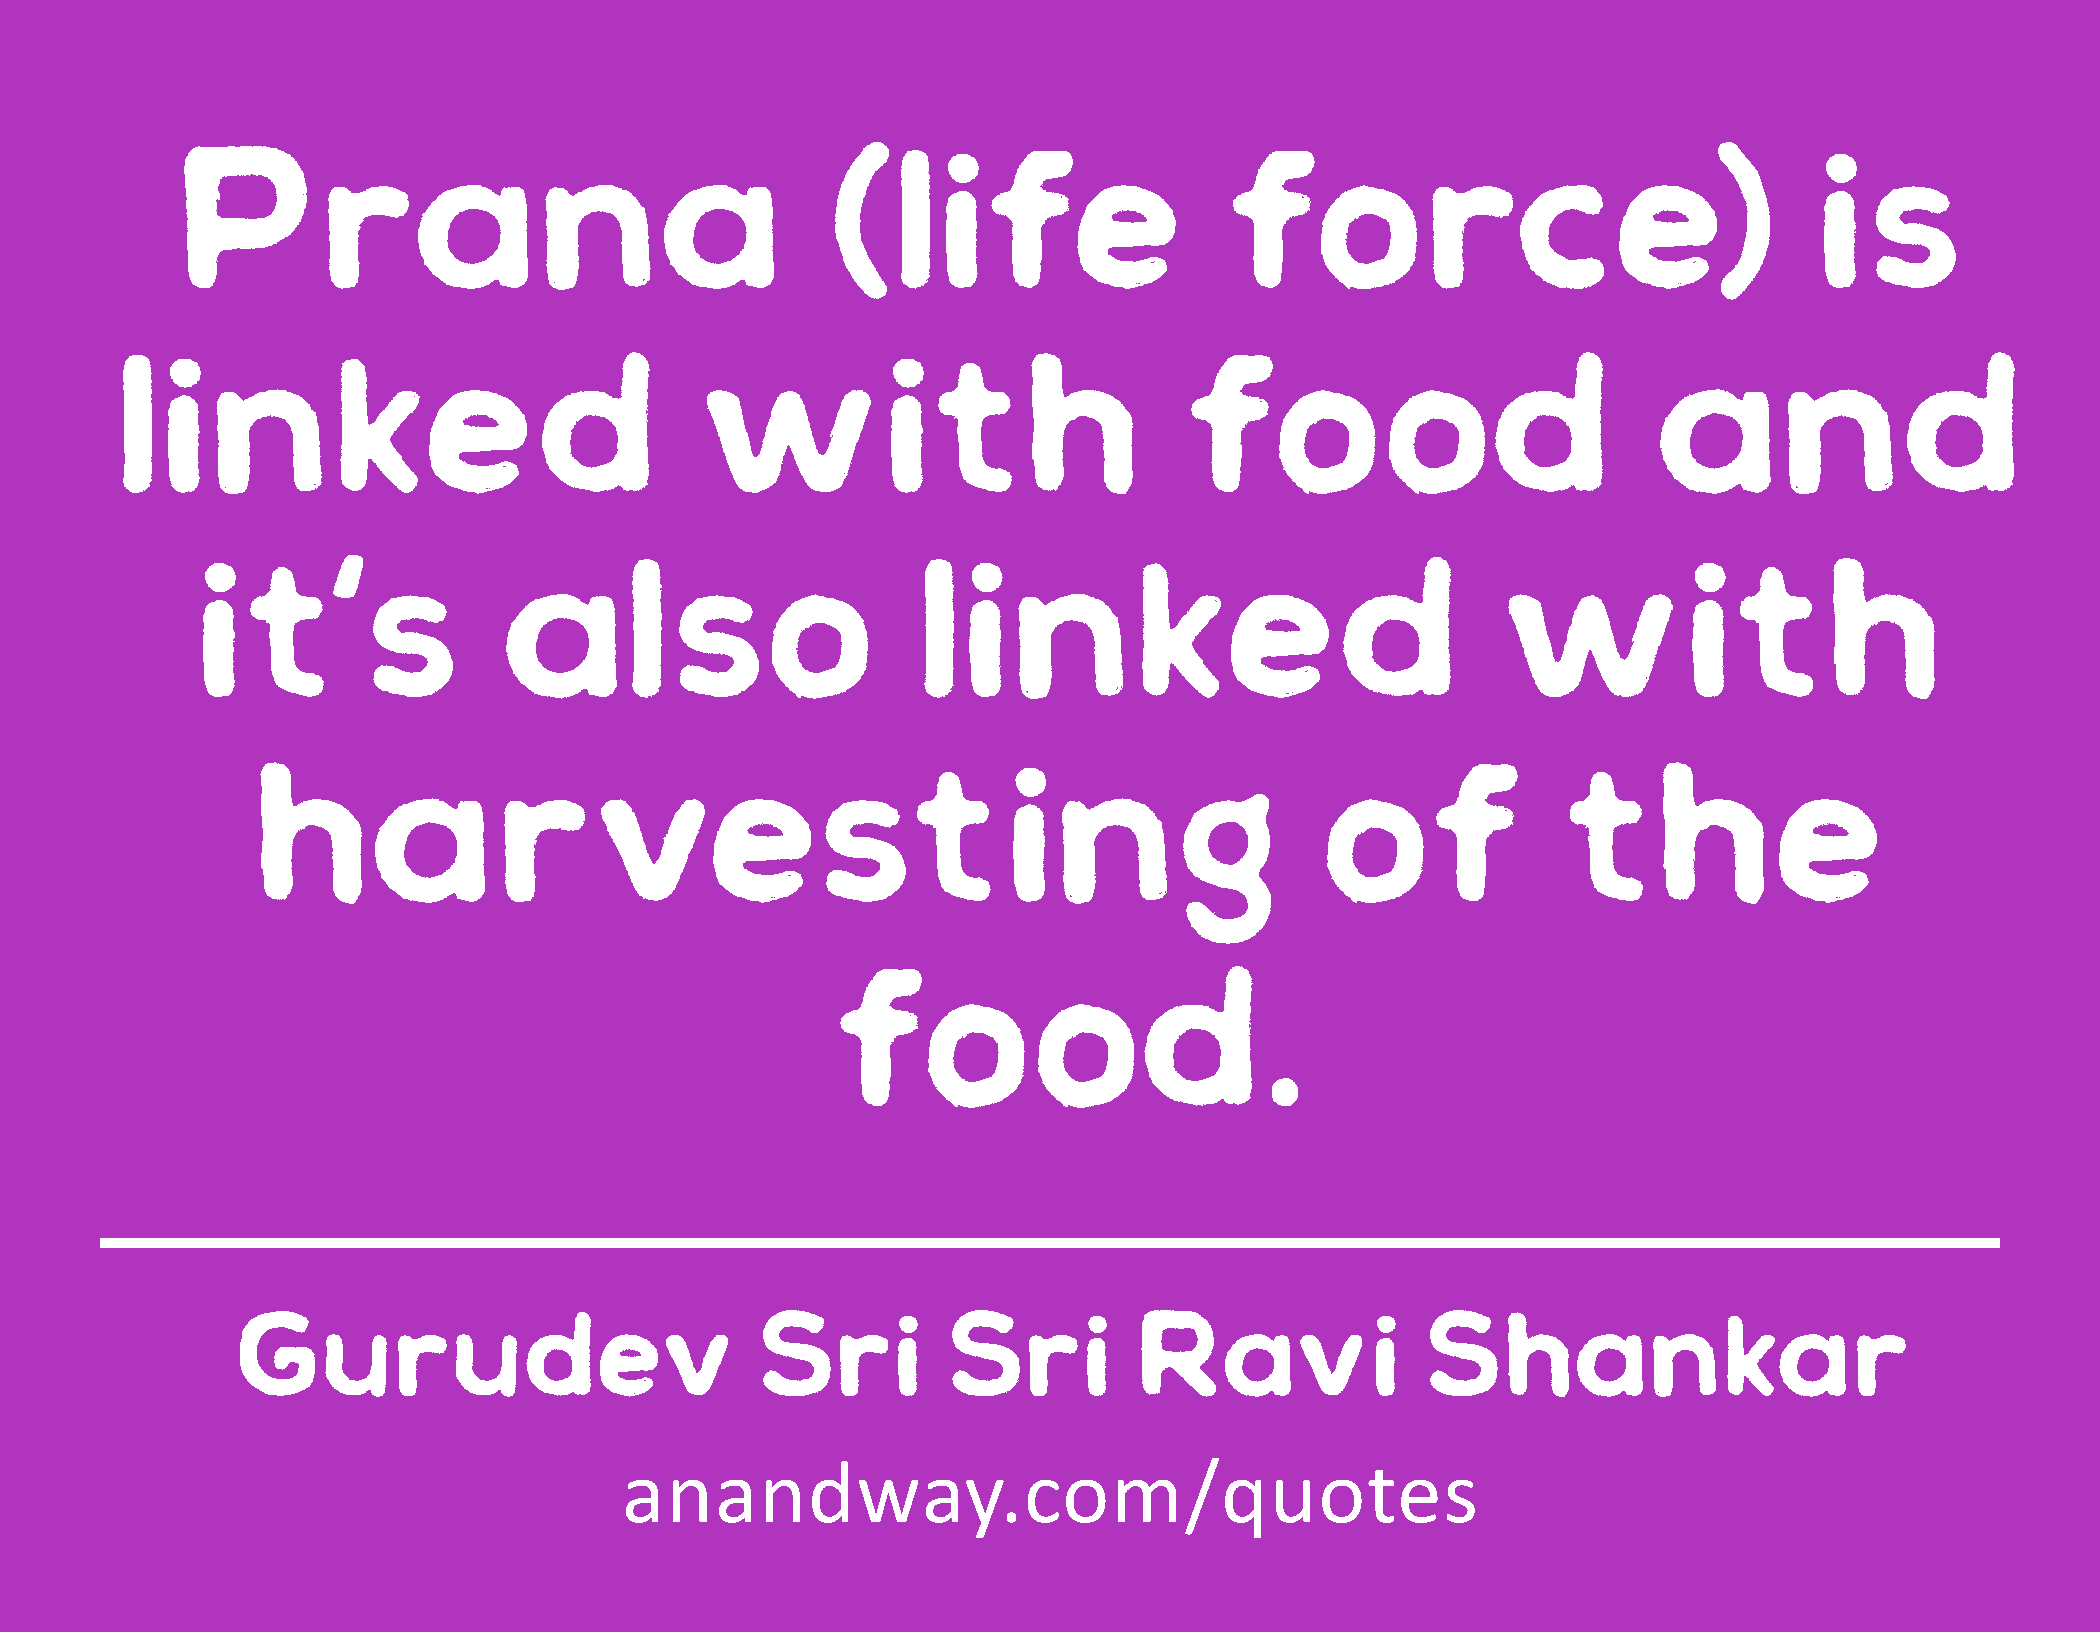 Prana (life force) is linked with food and it's also linked with harvesting of the food. 
 -Gurudev Sri Sri Ravi Shankar